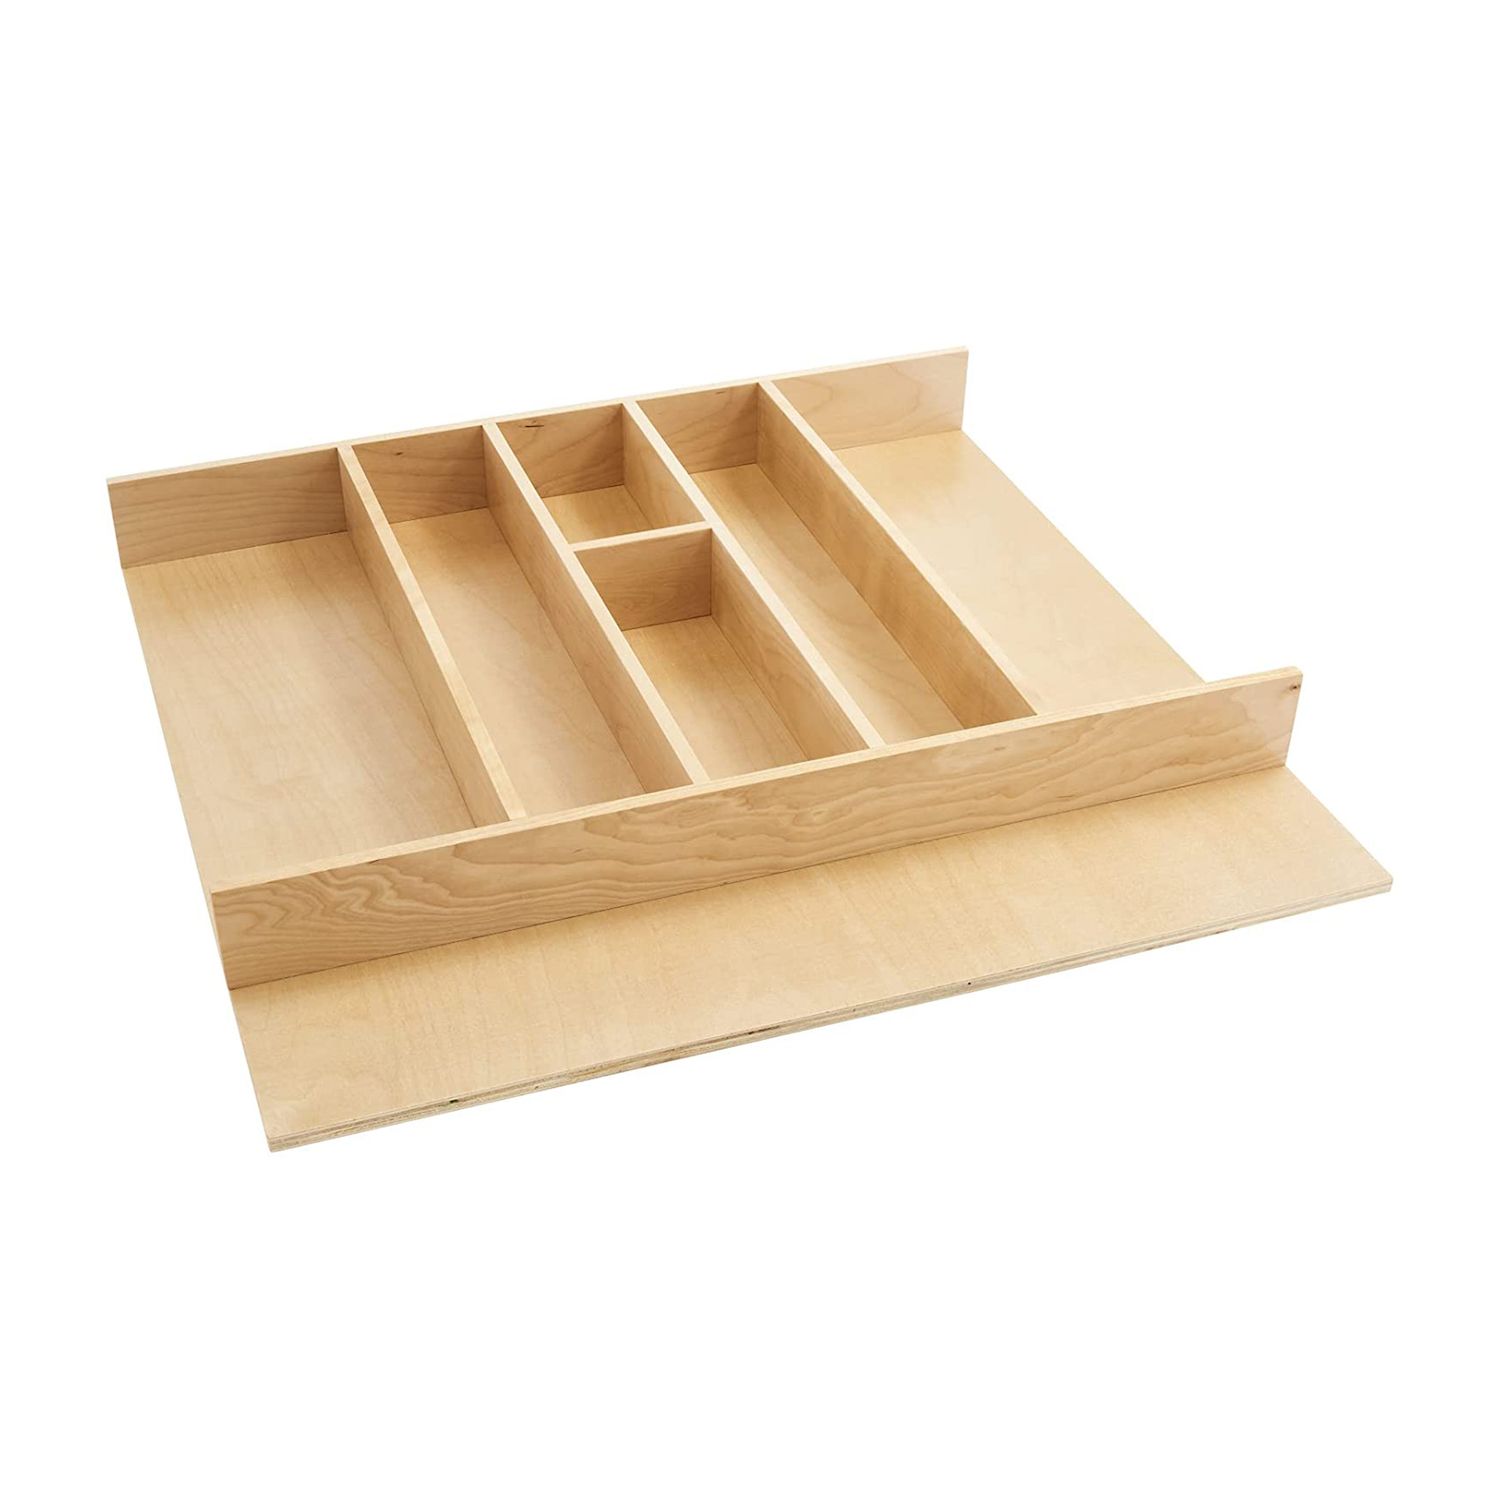 mDesign Bamboo Stackable Kitchen Drawer Organizer Tray, 4 Pack - Natural  Wood, 6 x 12 x 2